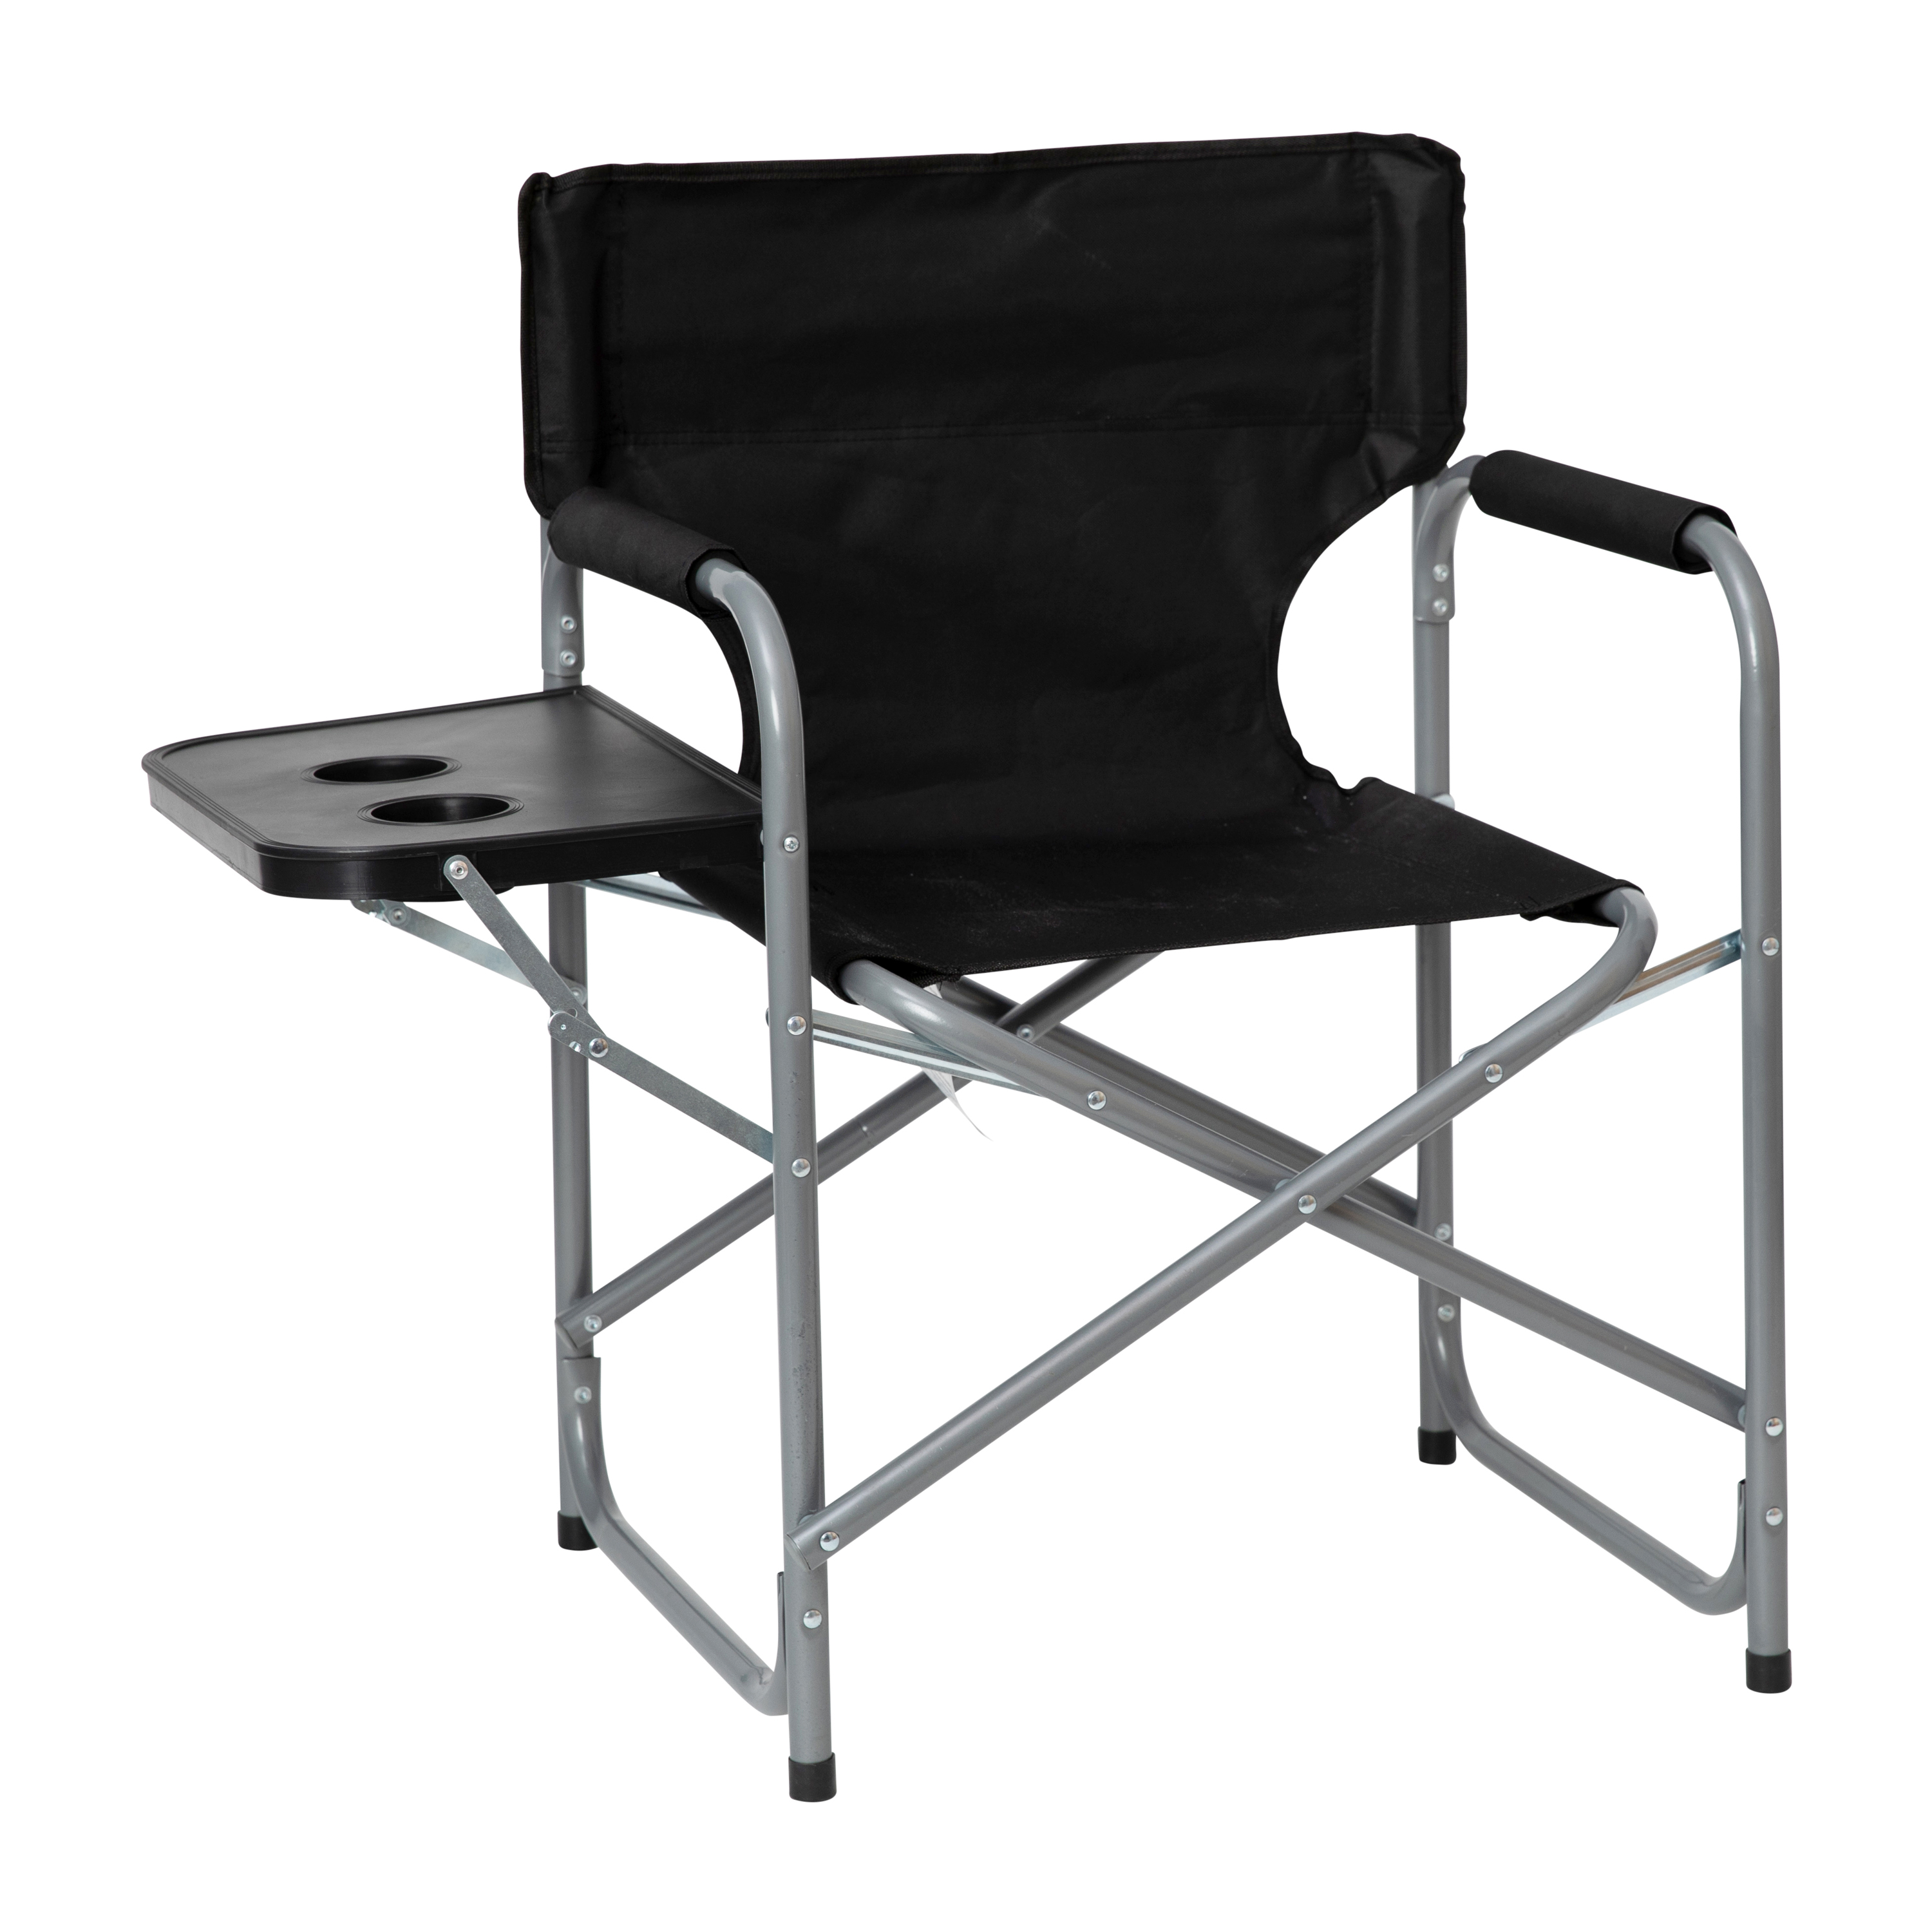 Emma + Oliver Black Canvas Folding Director's Chair with Gray Steel Tube Frame-Integrated Folding Side Table with Cupholders - image 2 of 12